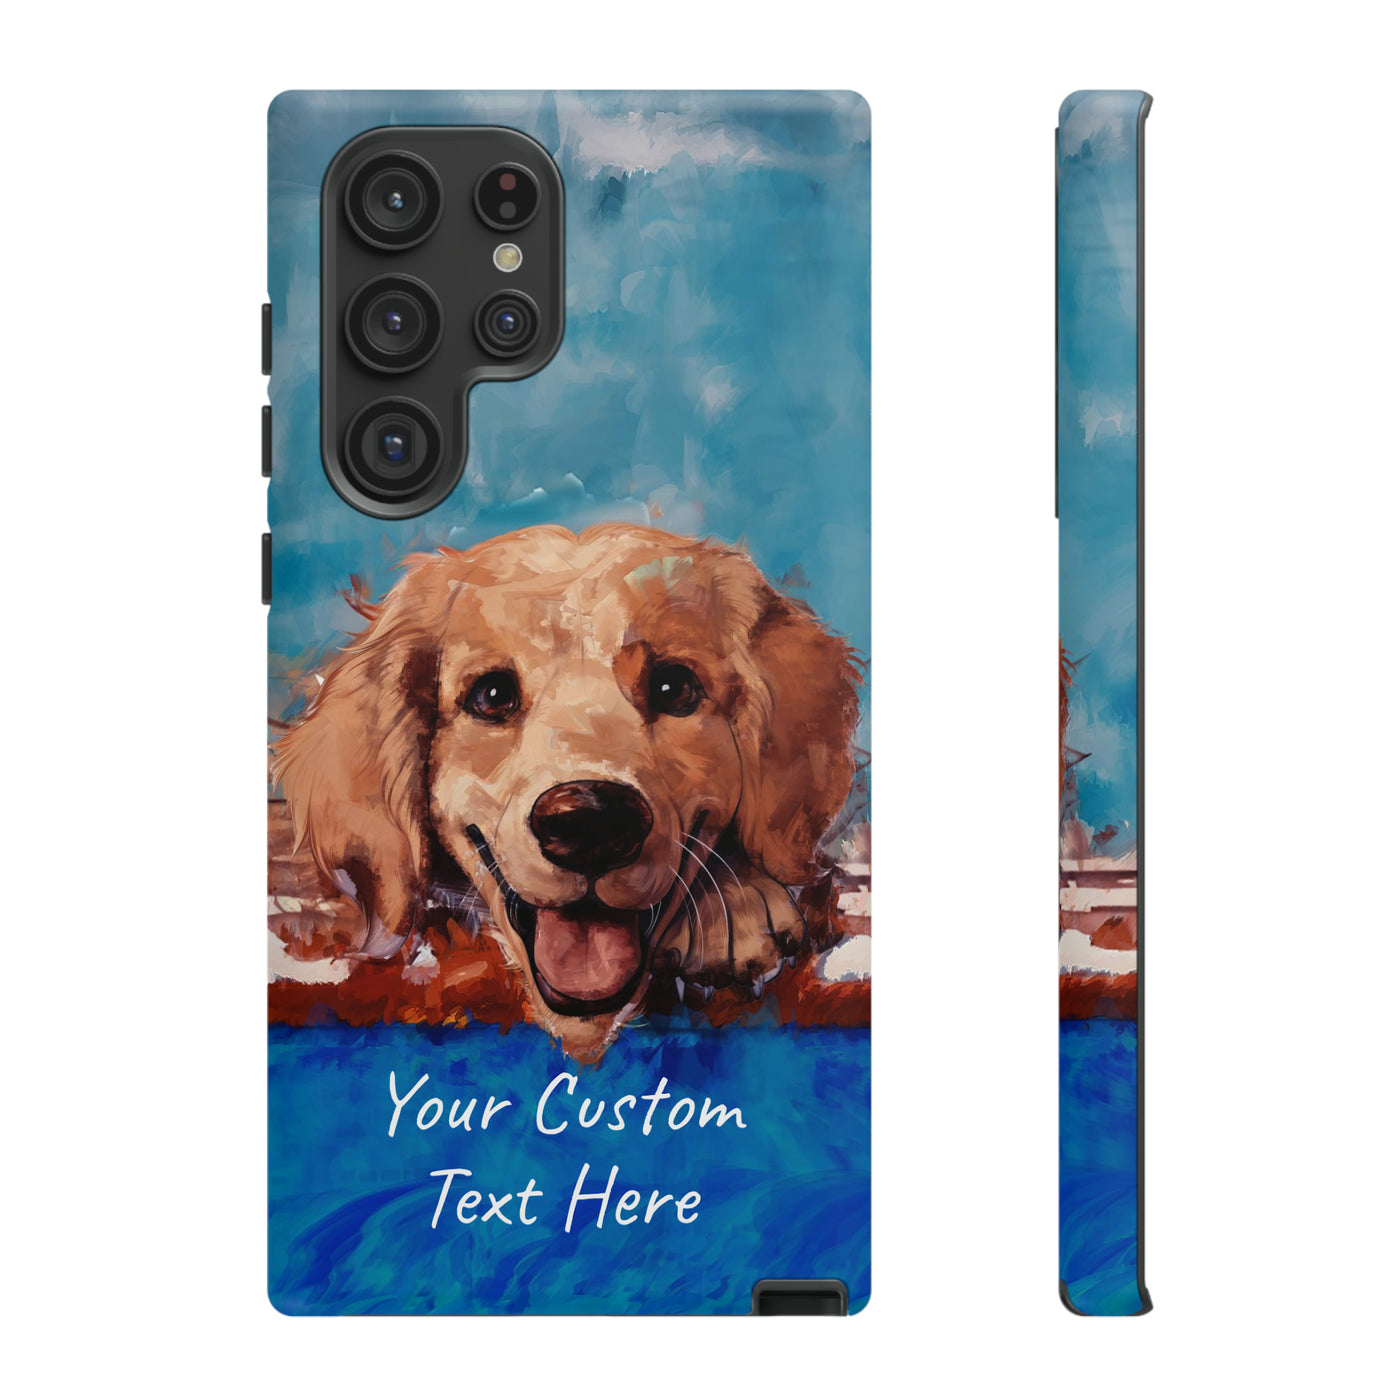 Personalize this Cute Samsung Phone Case | Golden Retriever Dog Samsung Phone Case | Galaxy S23, S22, S21, S20 | Personalized Samsung Cases